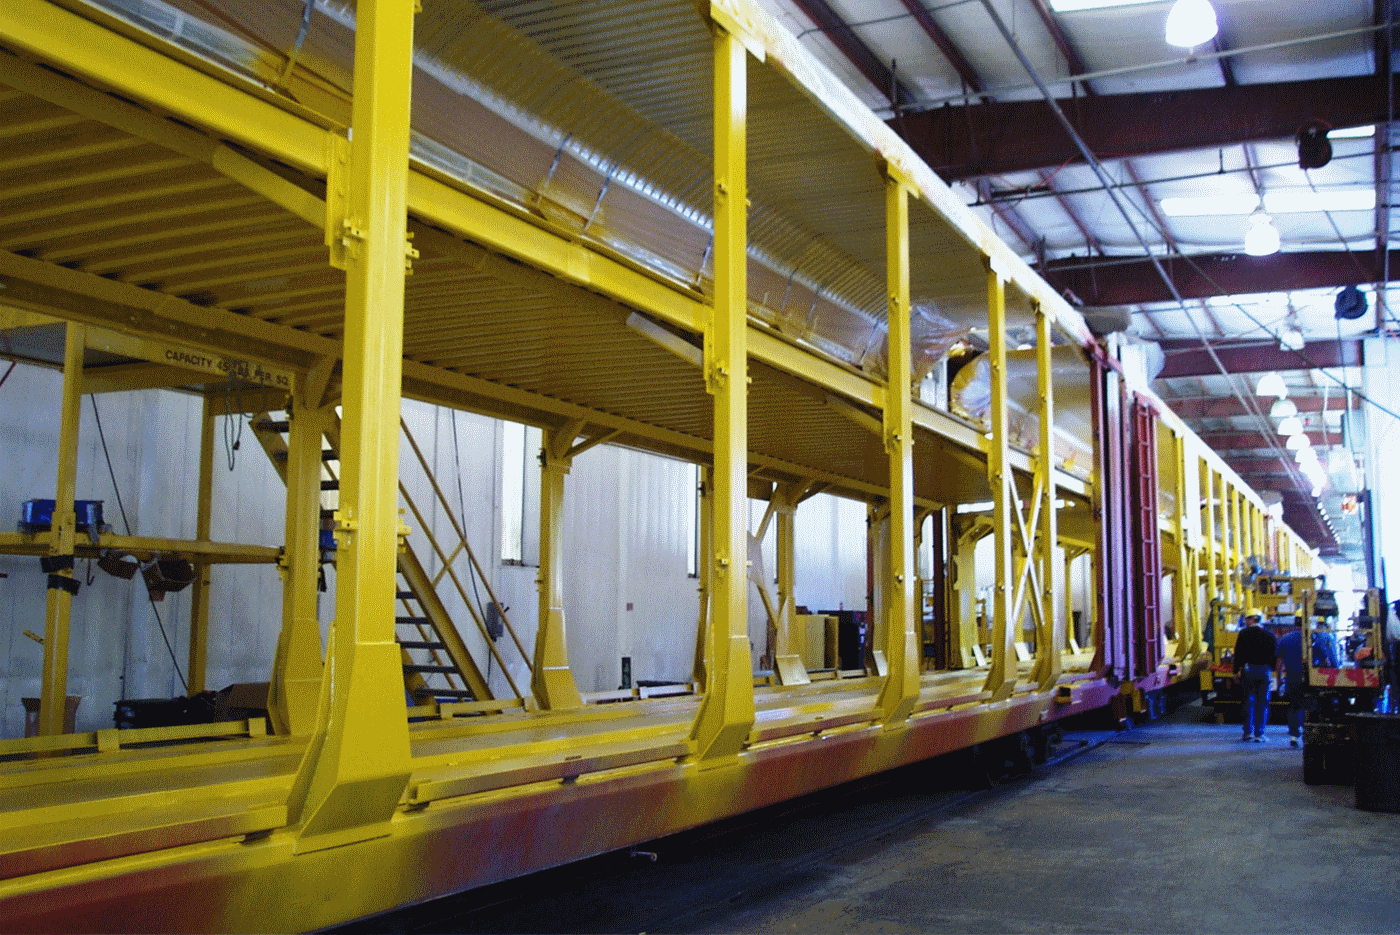 Auto carrier in the paint shop